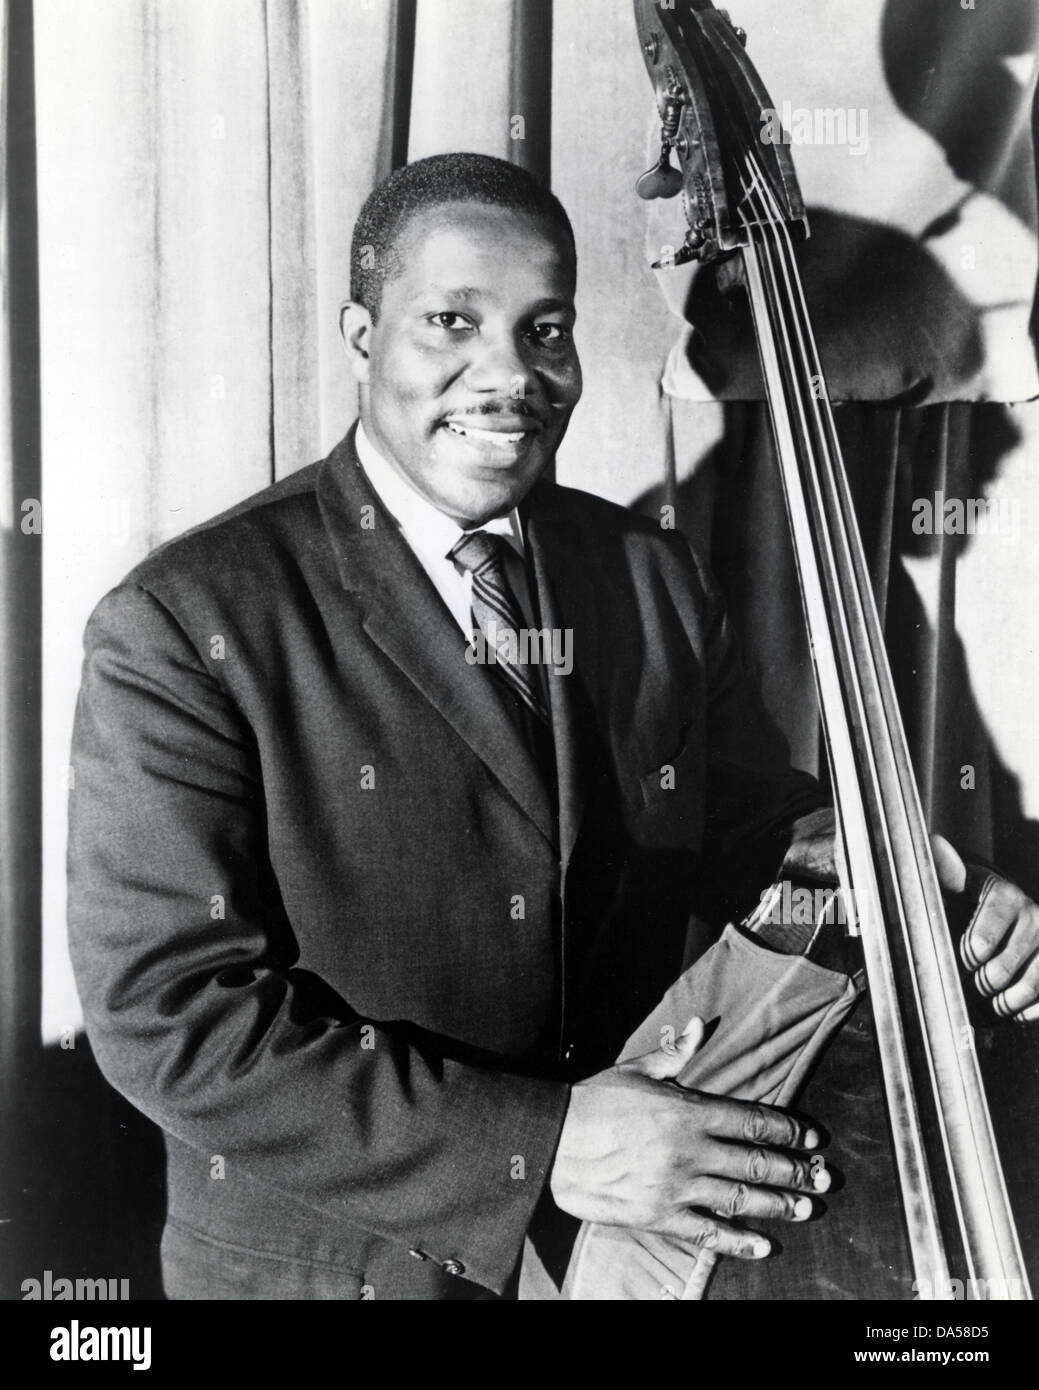 EUGENE GENE WRIGHT US jazz bass player about 1967.   He played with the Dave Brubeck Quartet. Stock Photo